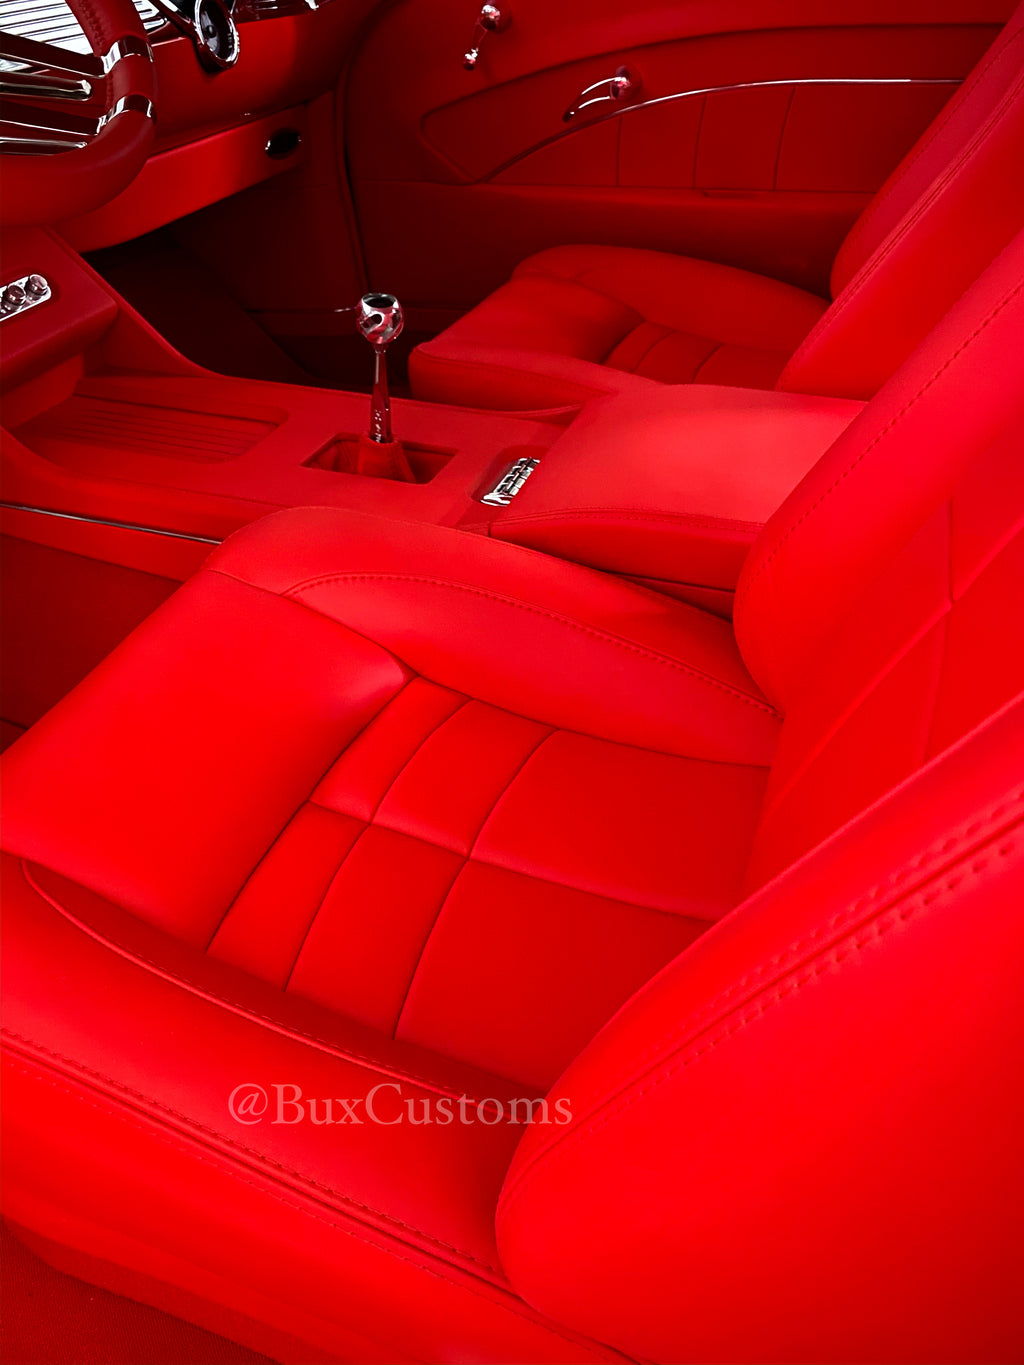 1956 chevy interiors upholstery